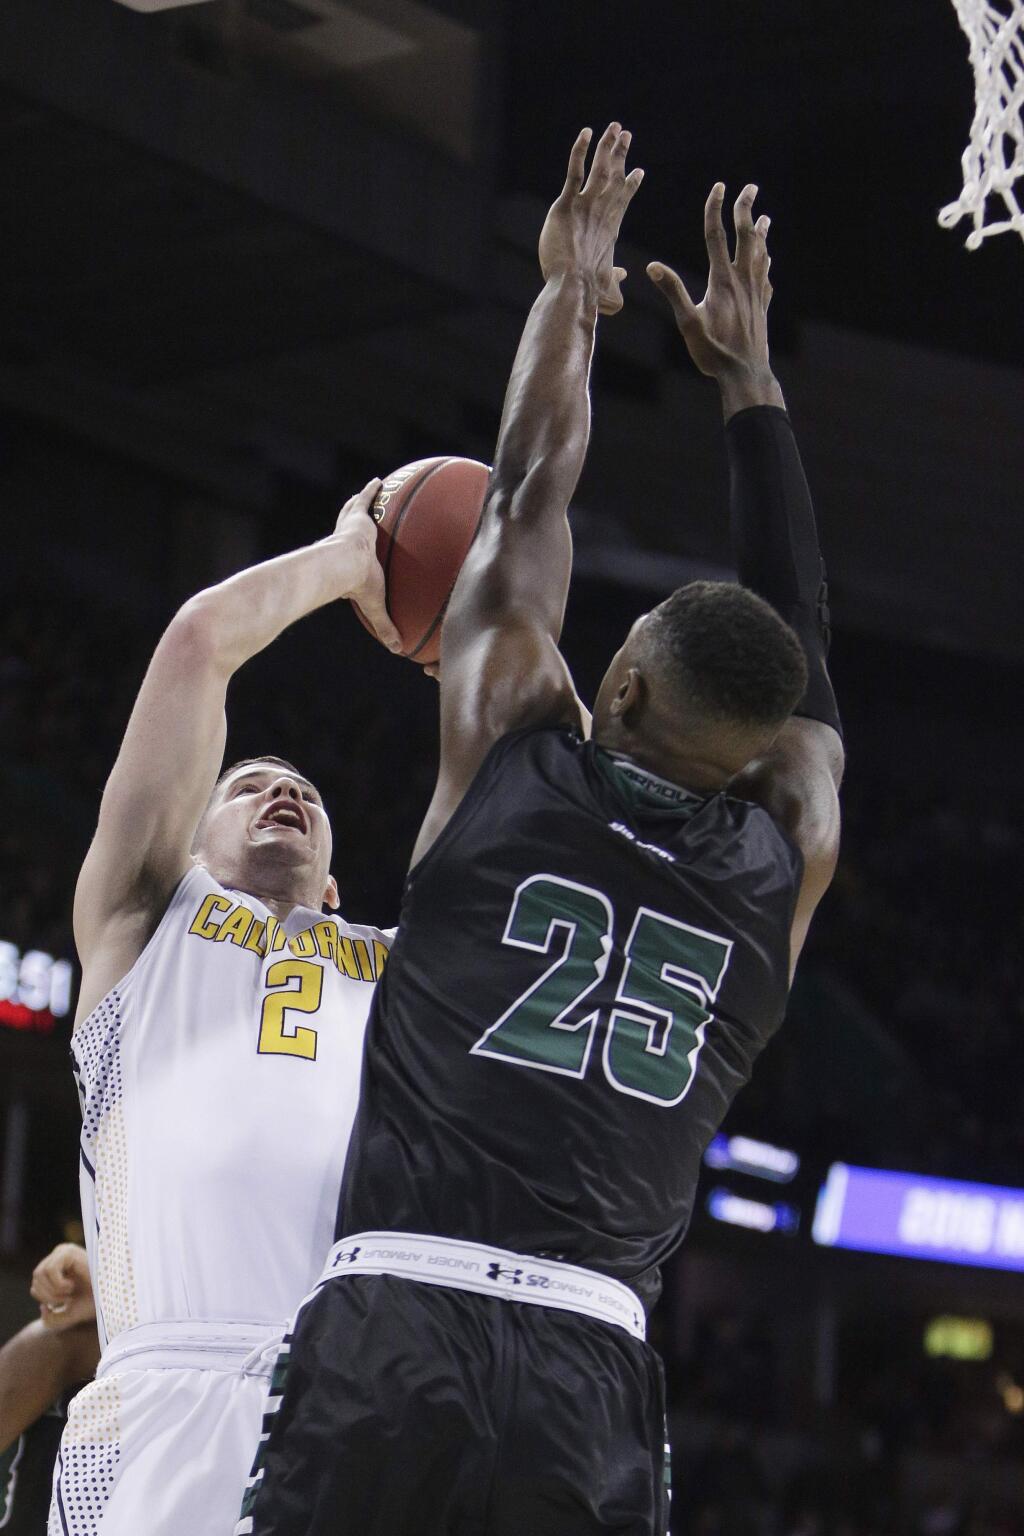 California guard Sam Singer (2) shoots against Hawaii forward Michael Thomas (25) during the first half of a first-round men's college basketball game in the NCAA Tournament in Spokane, Wash., Friday, March 18, 2016. (AP Photo/Young Kwak)